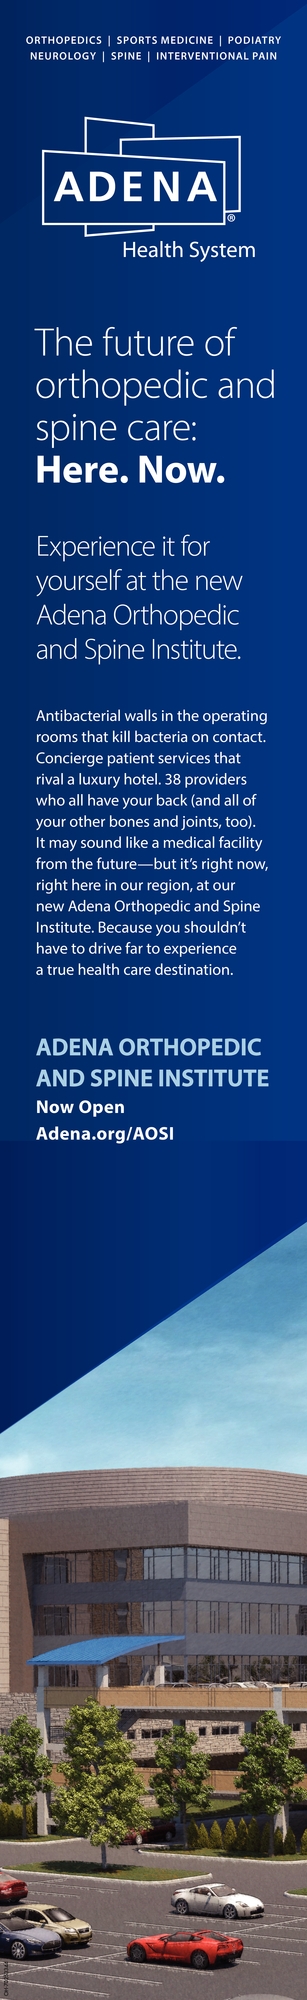 The Future of Orthopedic and Spine Care